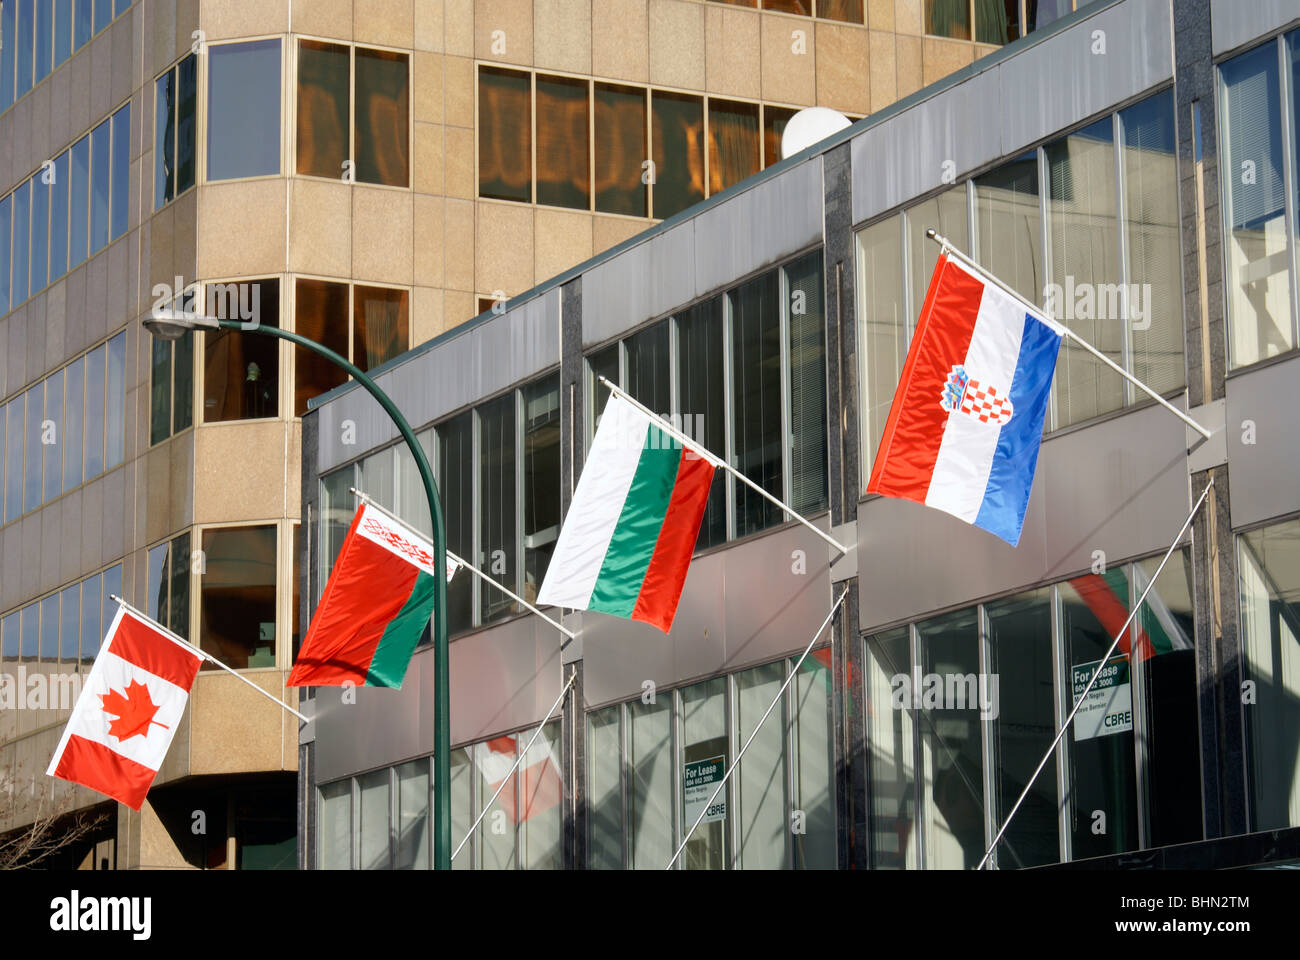 Flags from various nations outside a building during the 2010 Winter Games, Vancouver, British Columbia, Canada Stock Photo